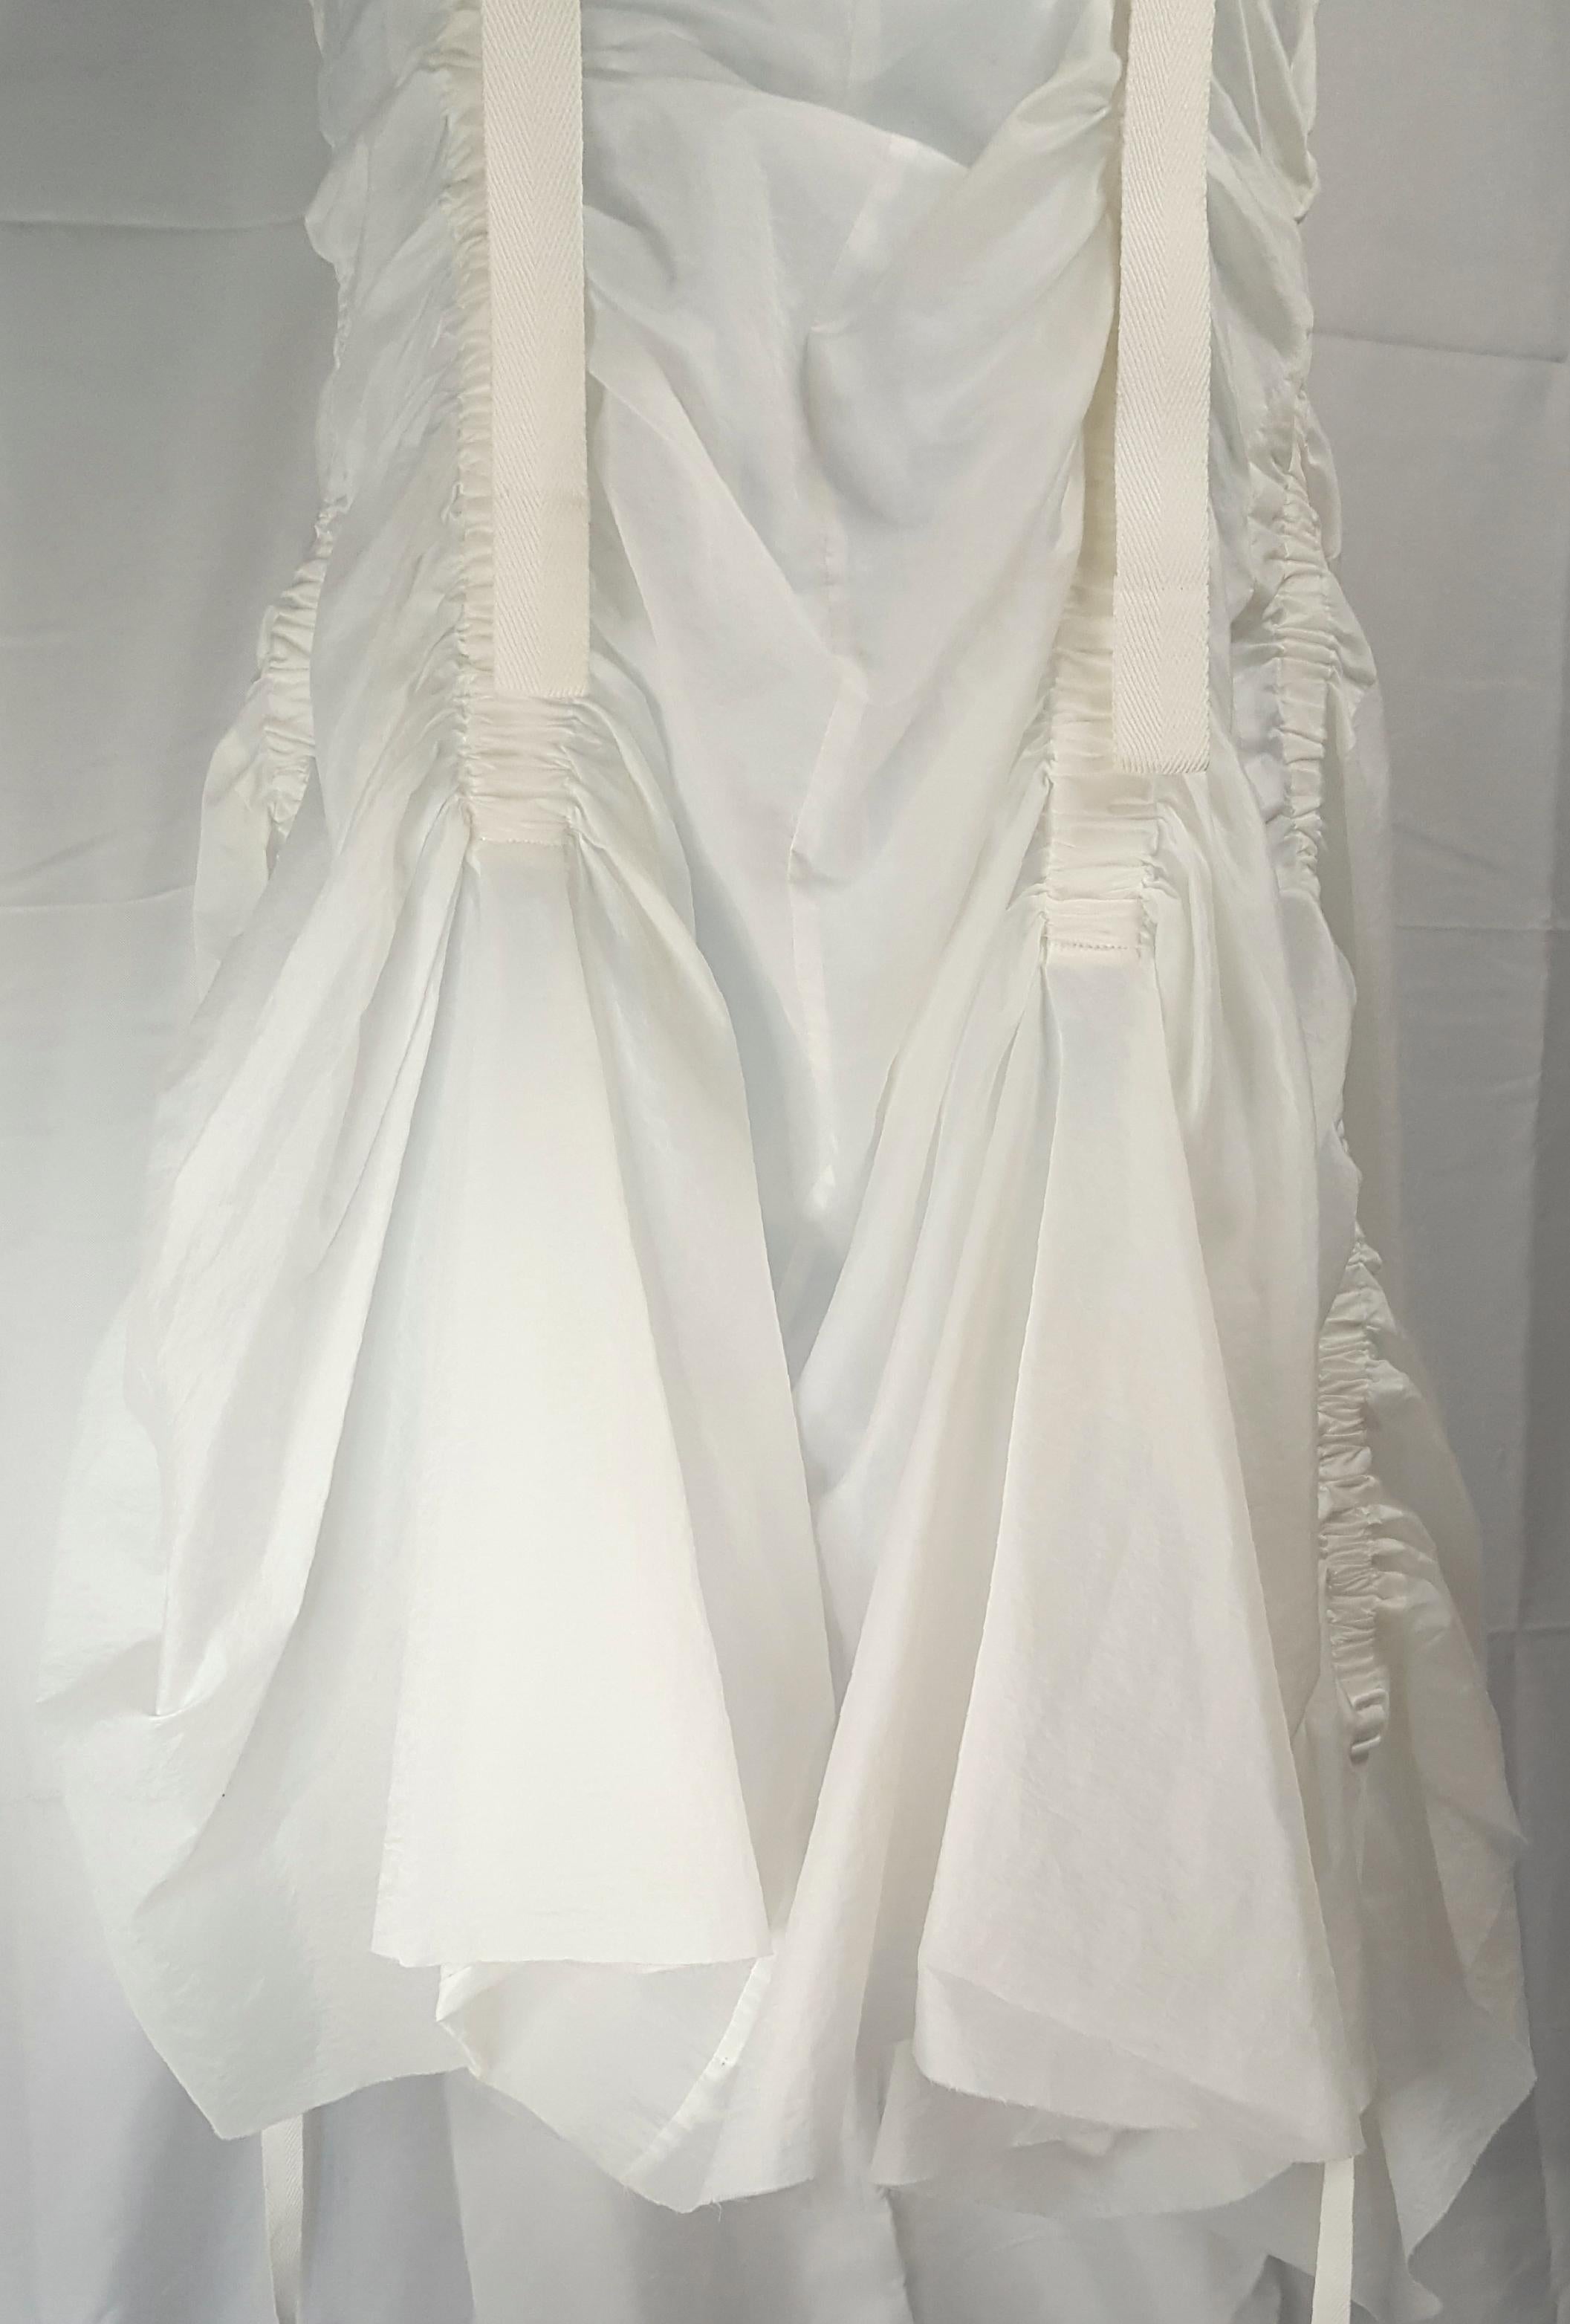 CommeDesGarcons 2003 RunwayLook1 Ruched Parachute Convertible White Dress Gown For Sale 1